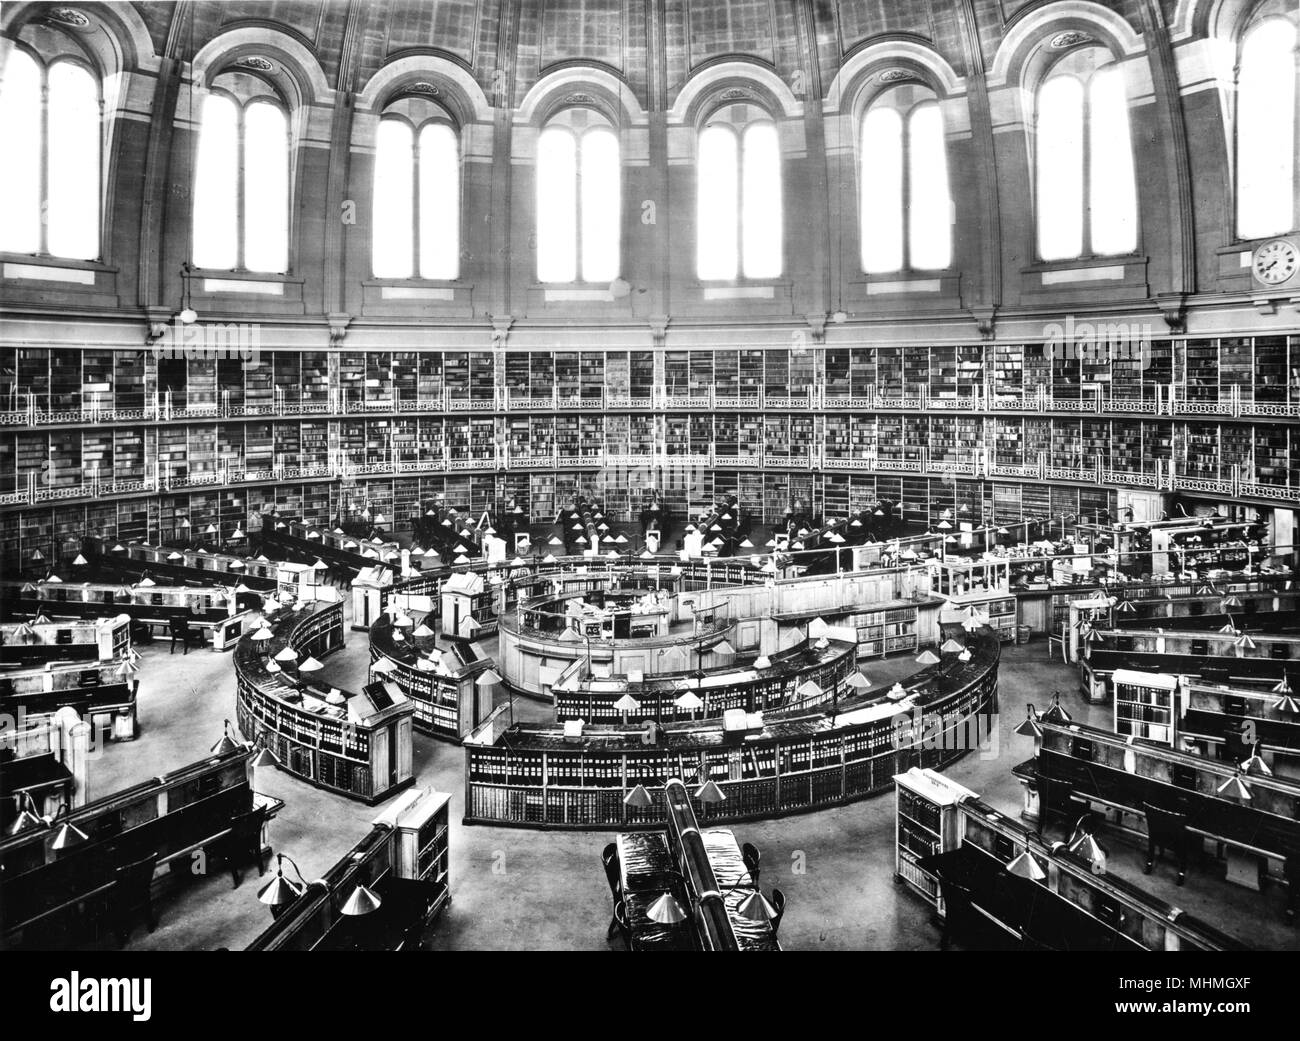 The reading room at the British Museum       Date: 1952 Stock Photo